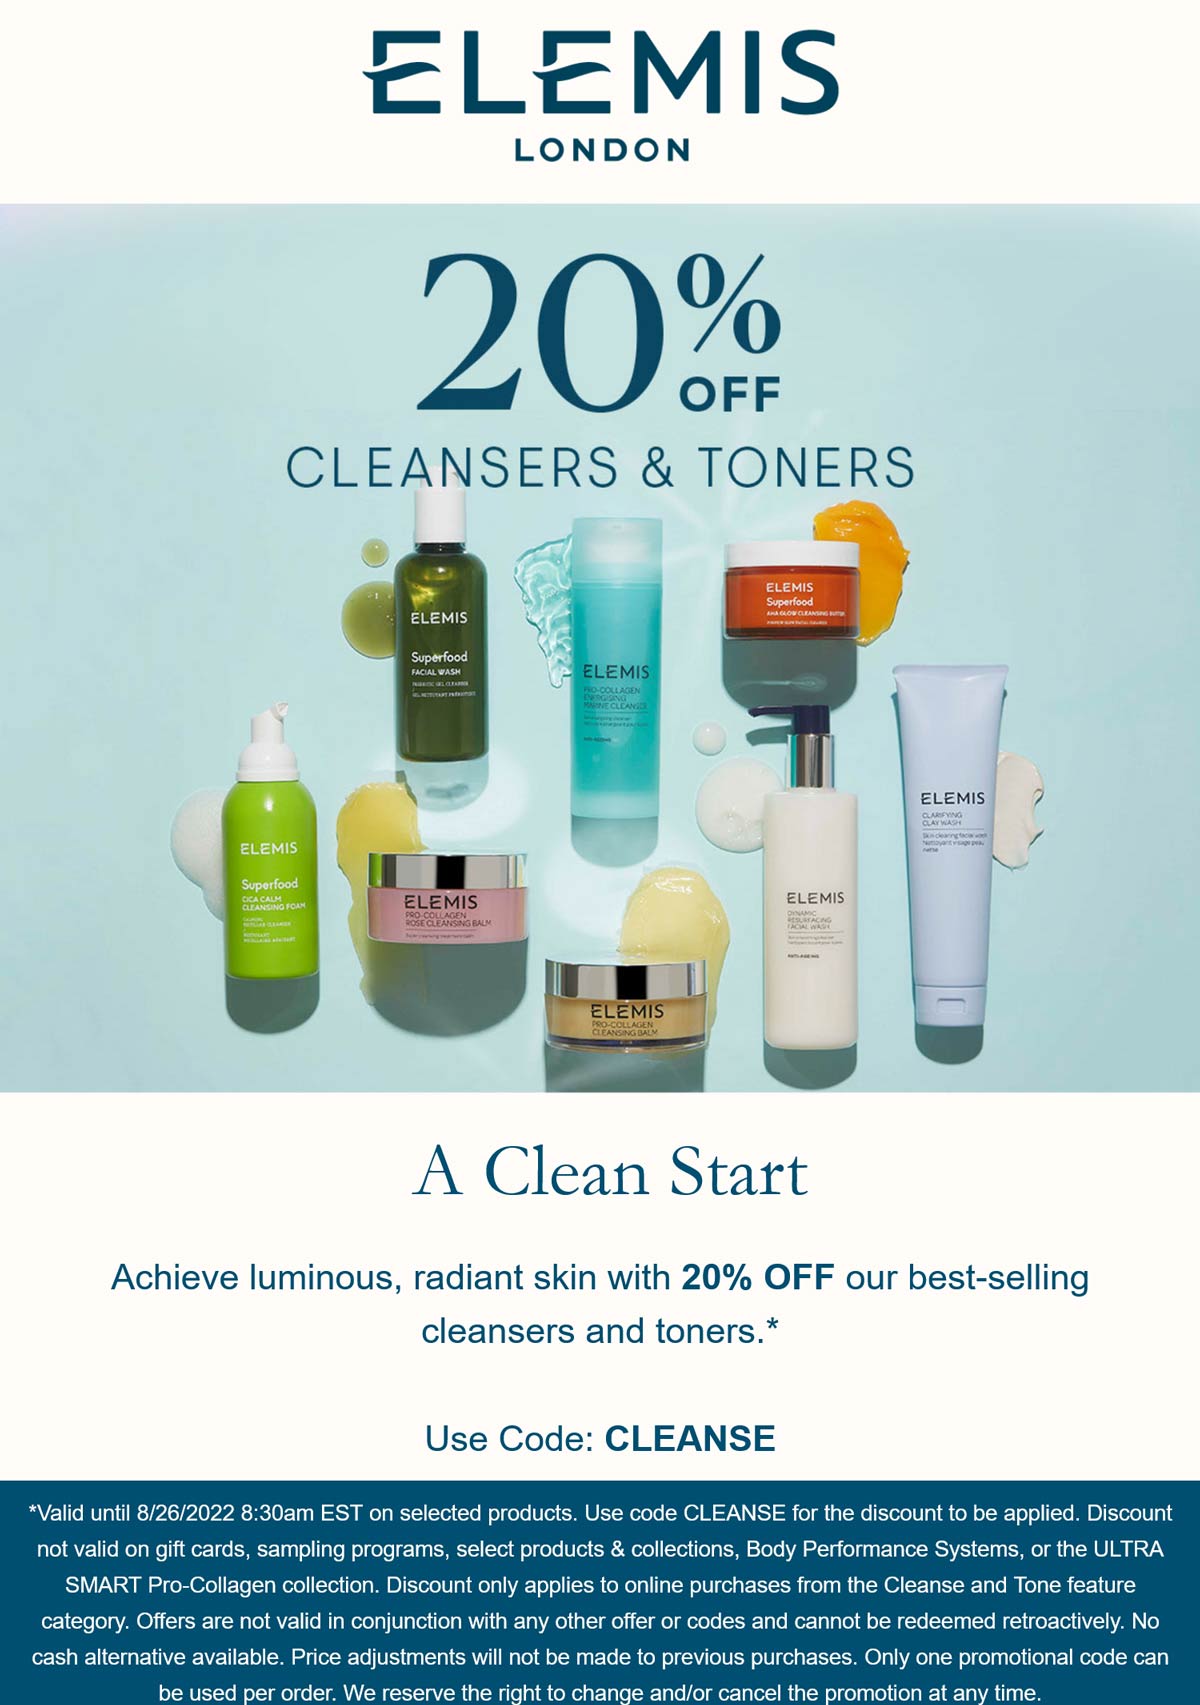 Elemis stores Coupon  20% off cleansers & toners today at Elemis via promo code CLEANSE #elemis 